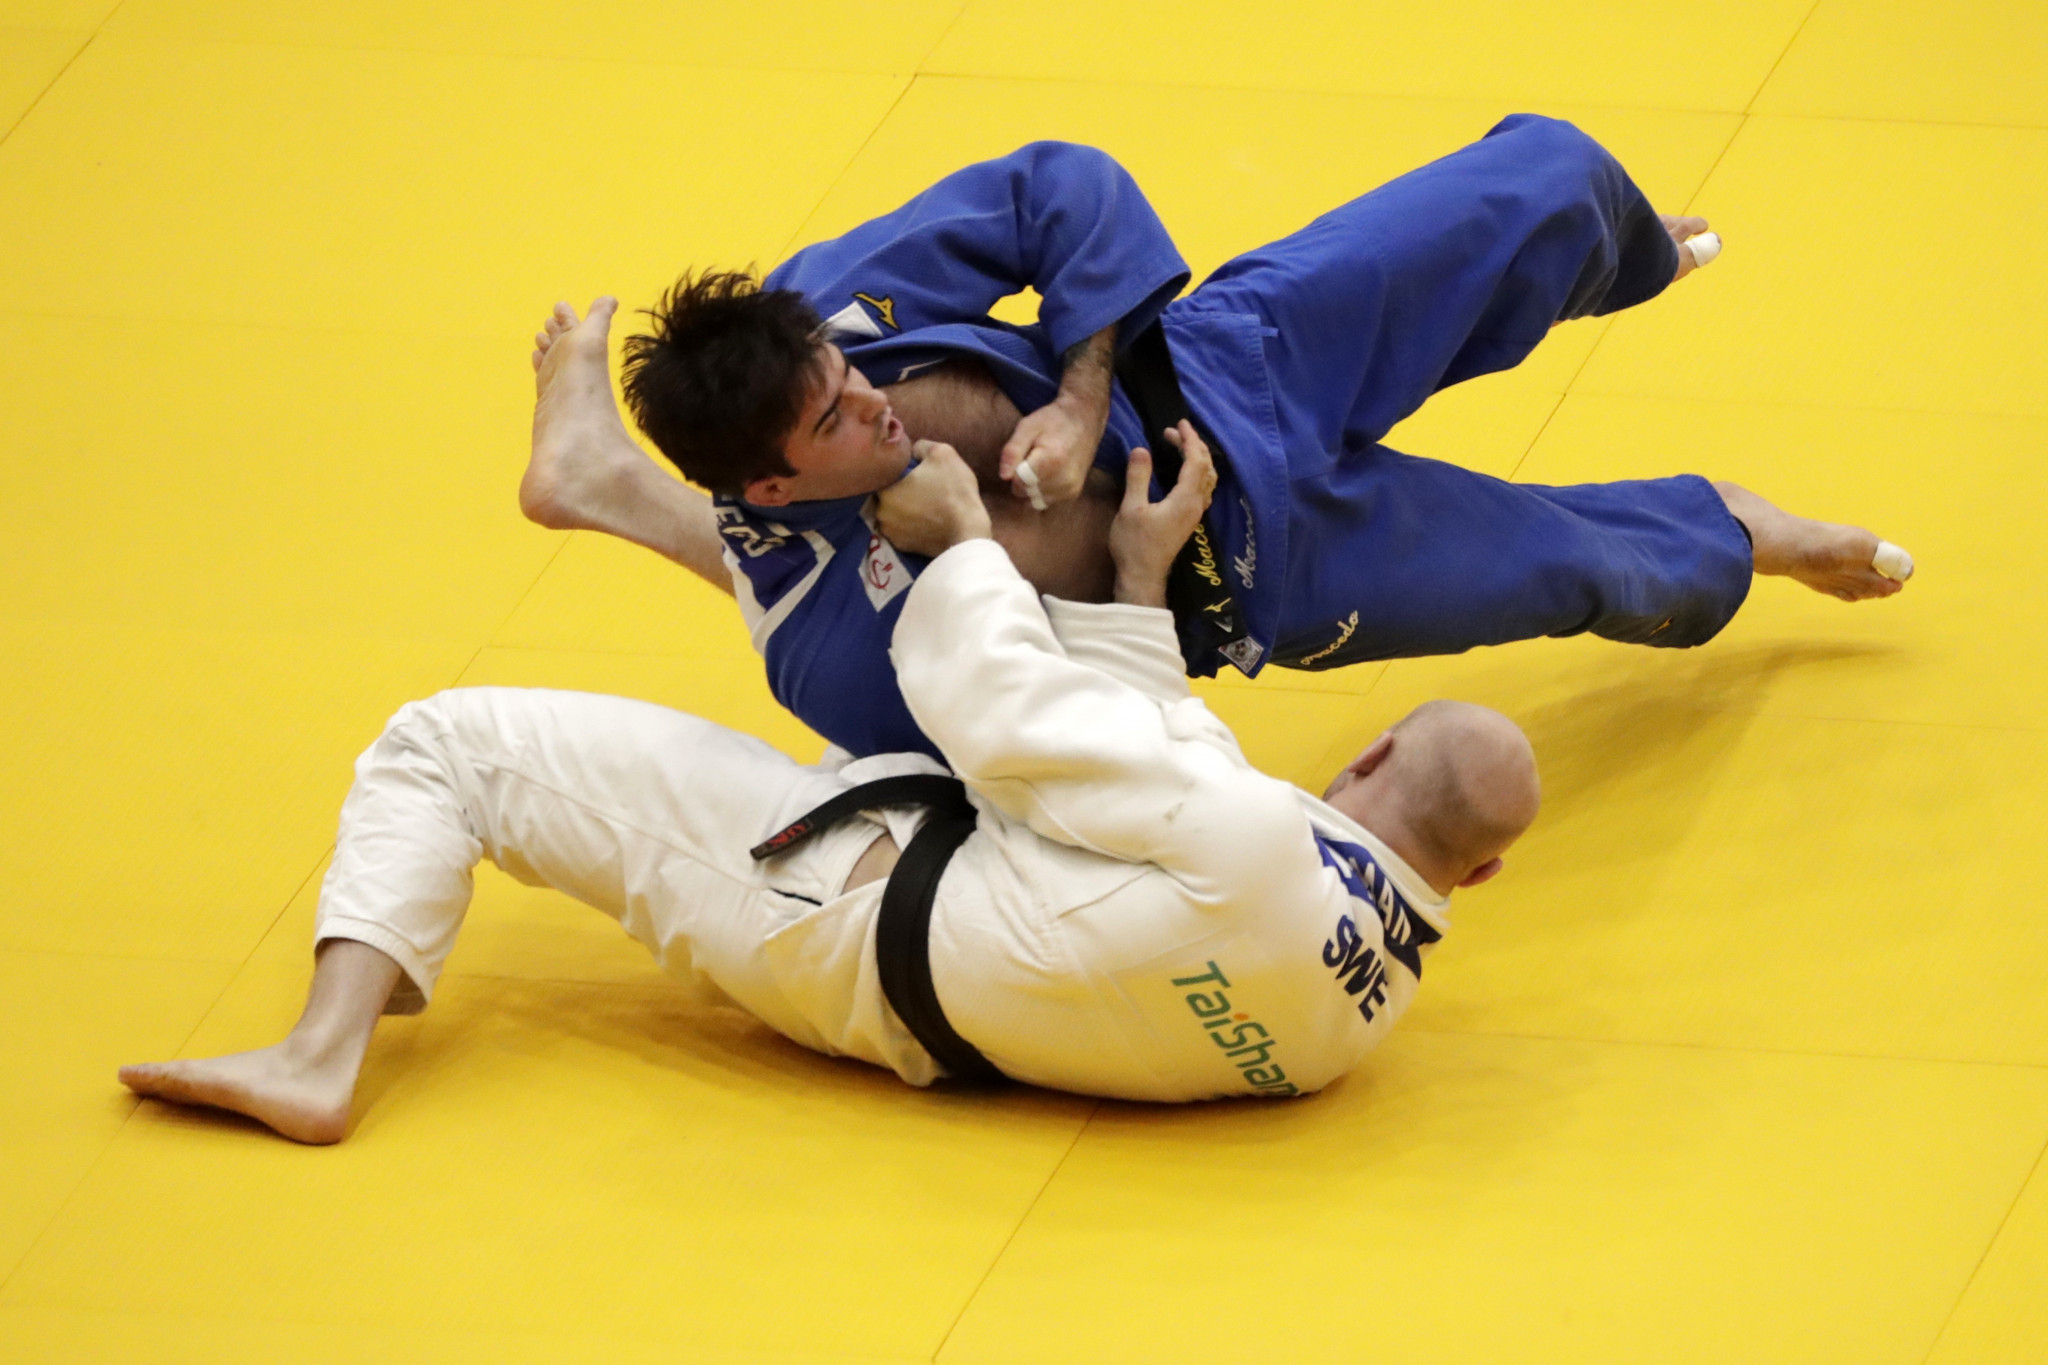 International Judo Federation confirms rule changes for Paris 2024 Olympic cycle